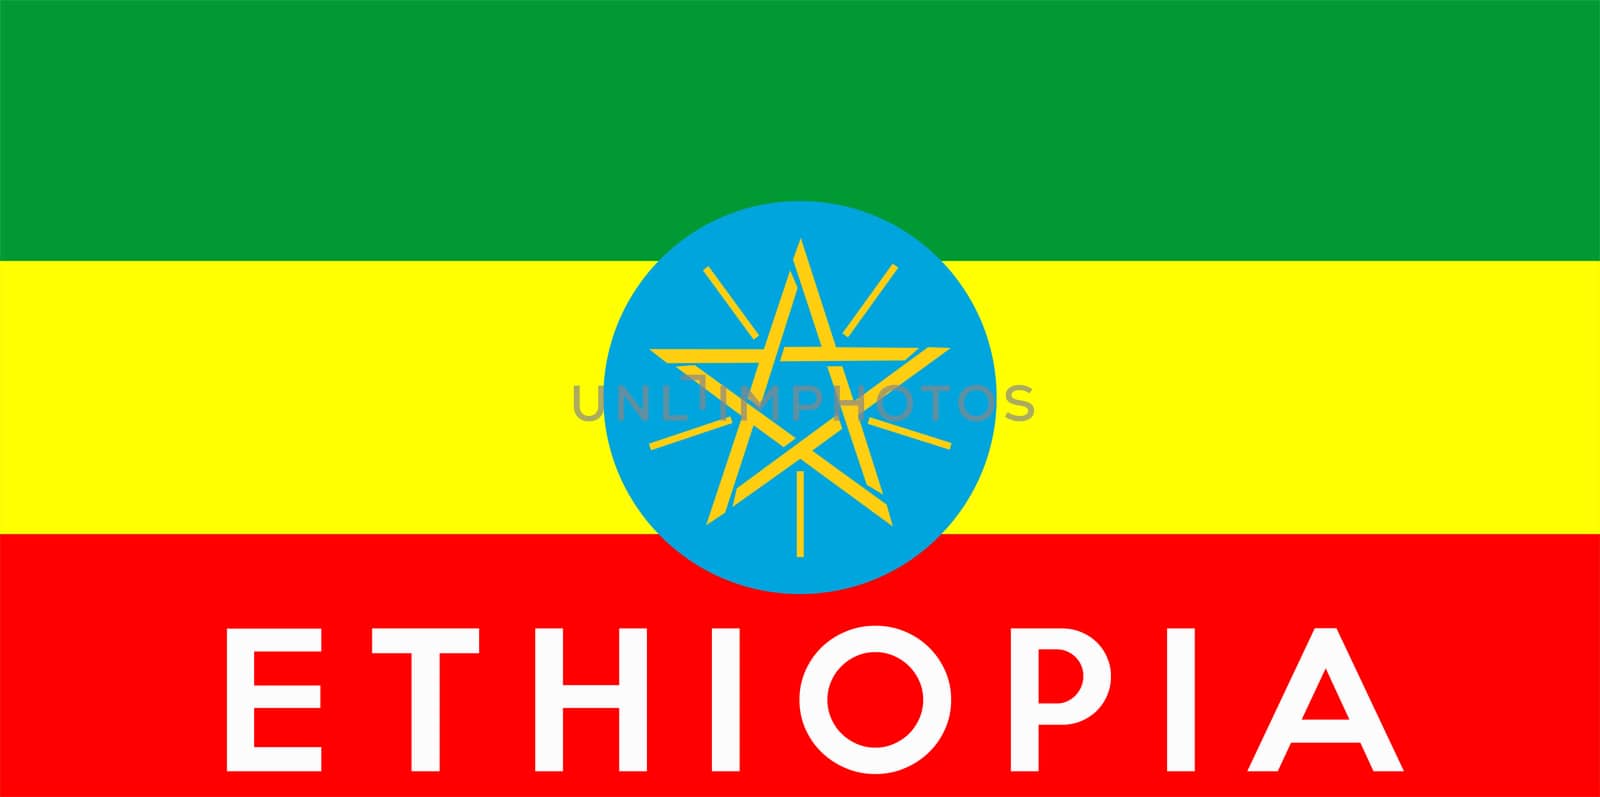 very big size illustration country flag of ethiopia